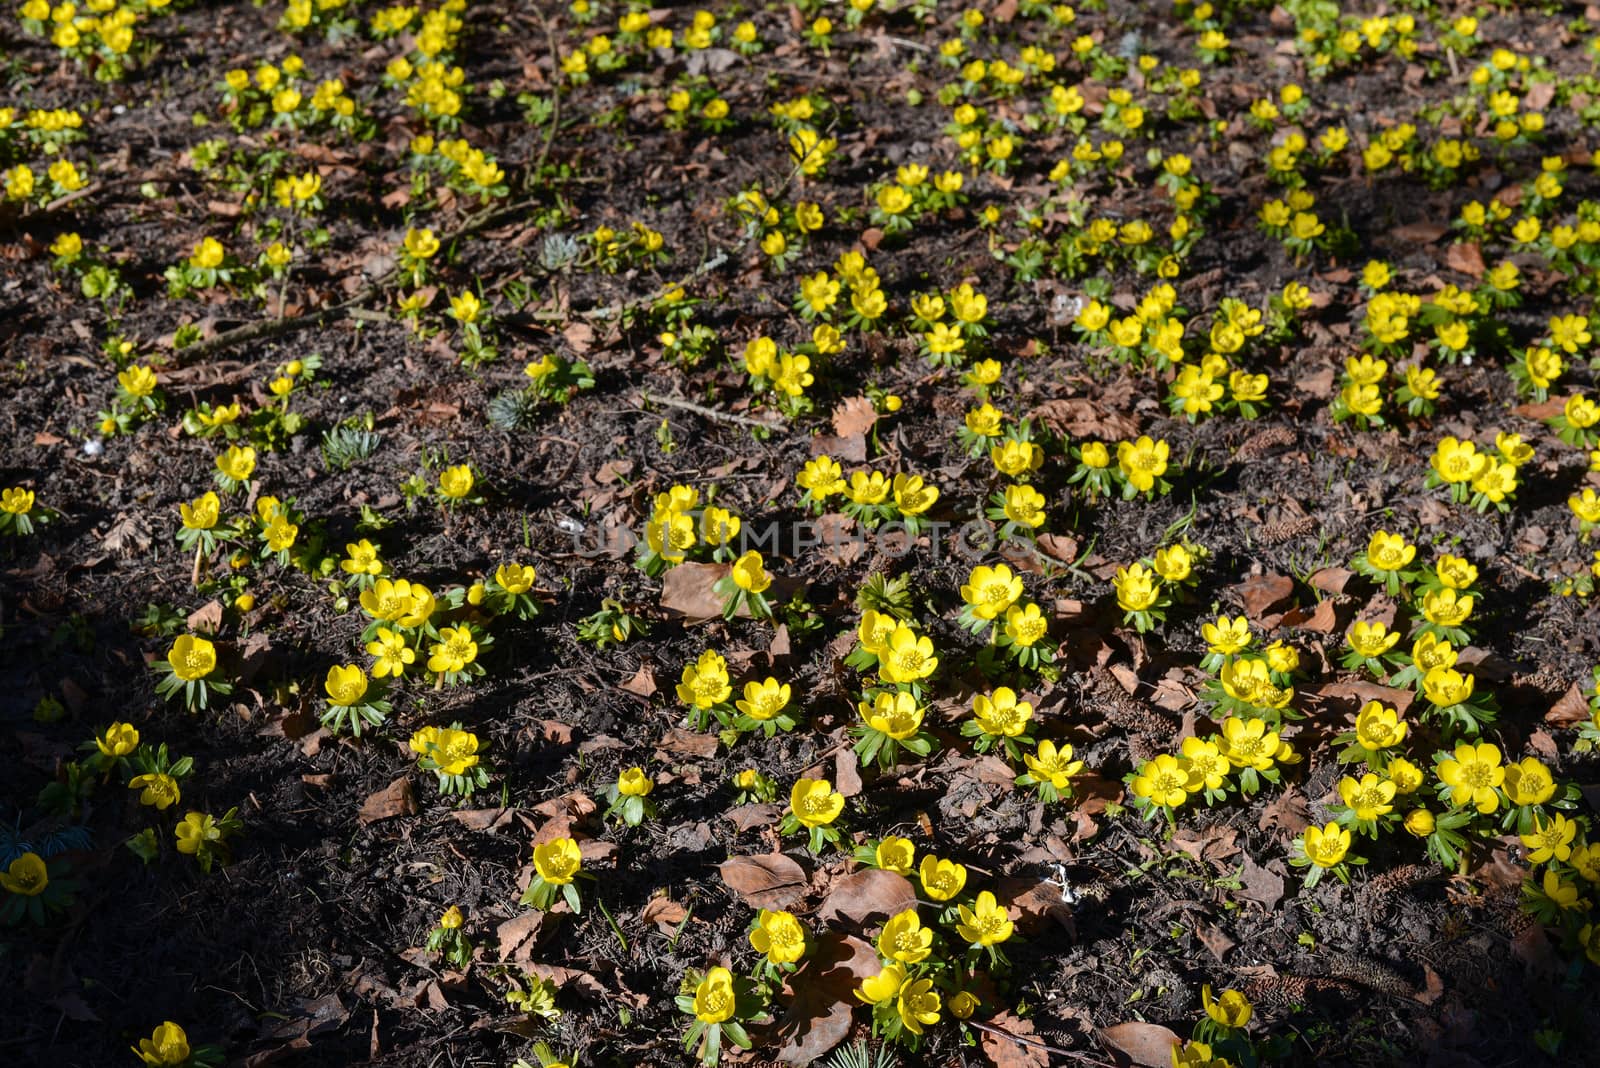 A field of winter aconite, Eranthis hyemalis flowering in March